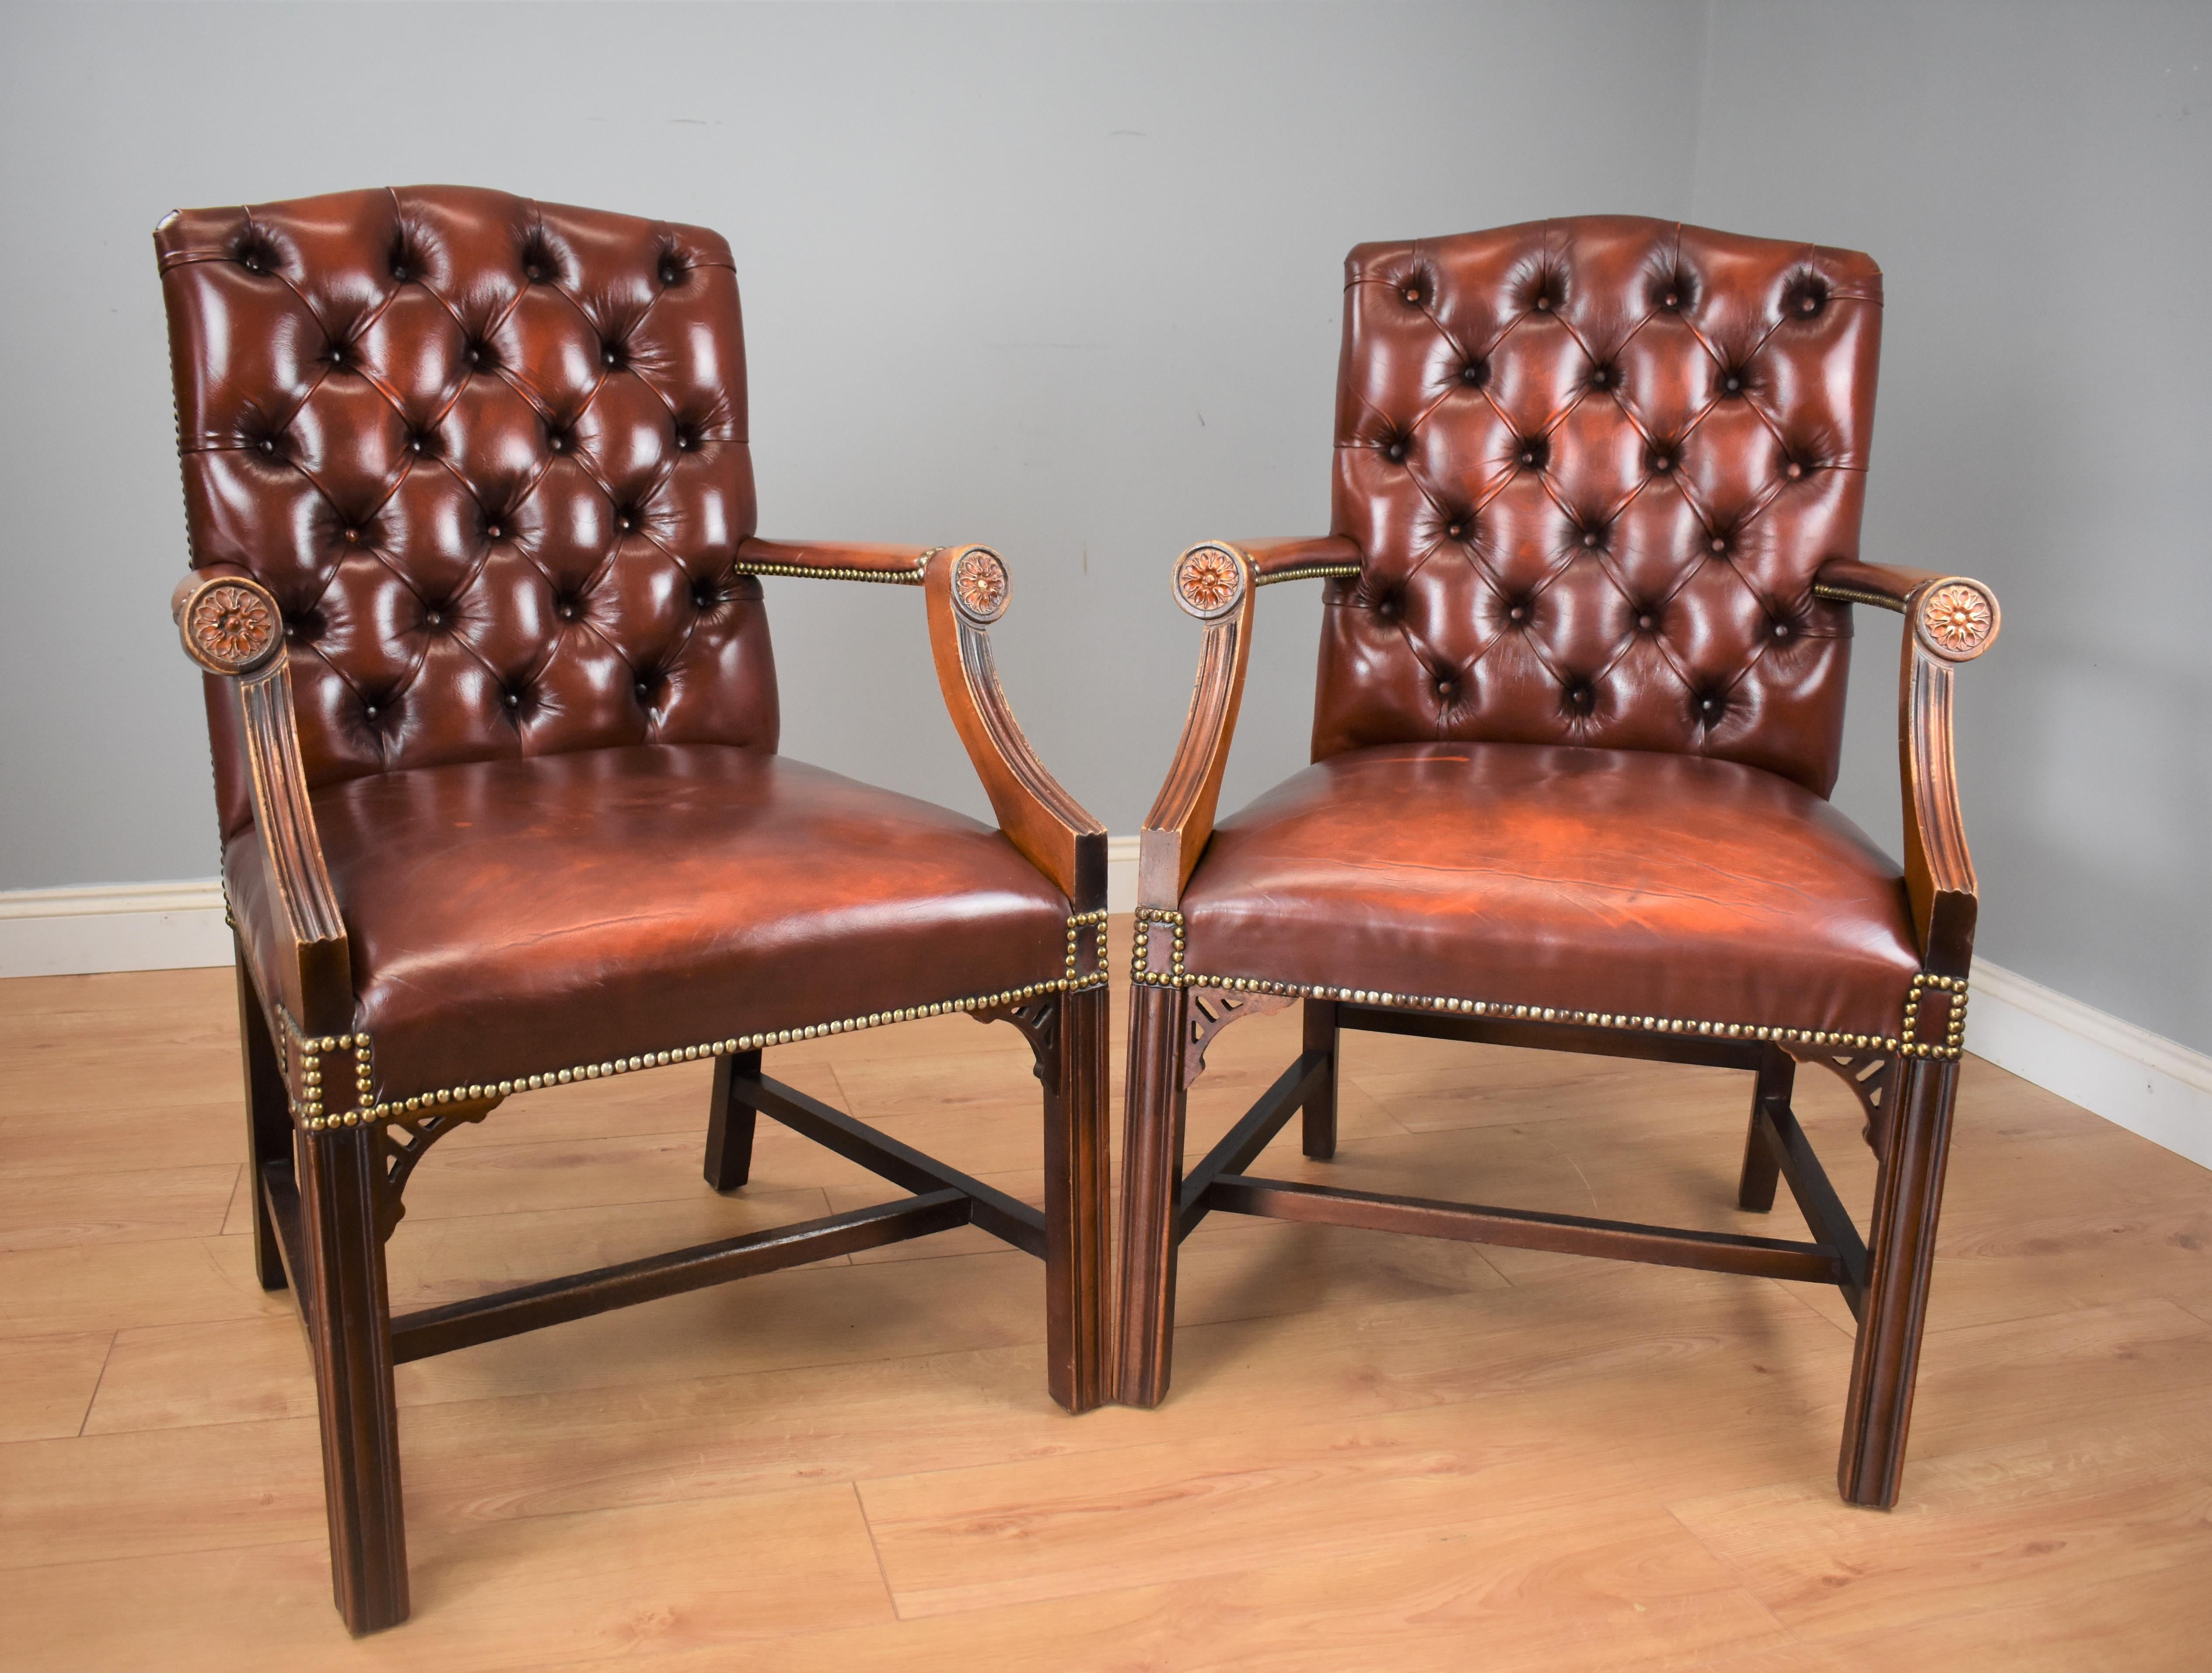 For sale is a pair of mid-20th century leather Gainsborough library chairs having deep buttoned backs with brass studded edges. The solid mahogany frame standing on square legs united by a stretcher. 

Dimensions:
 Width 26